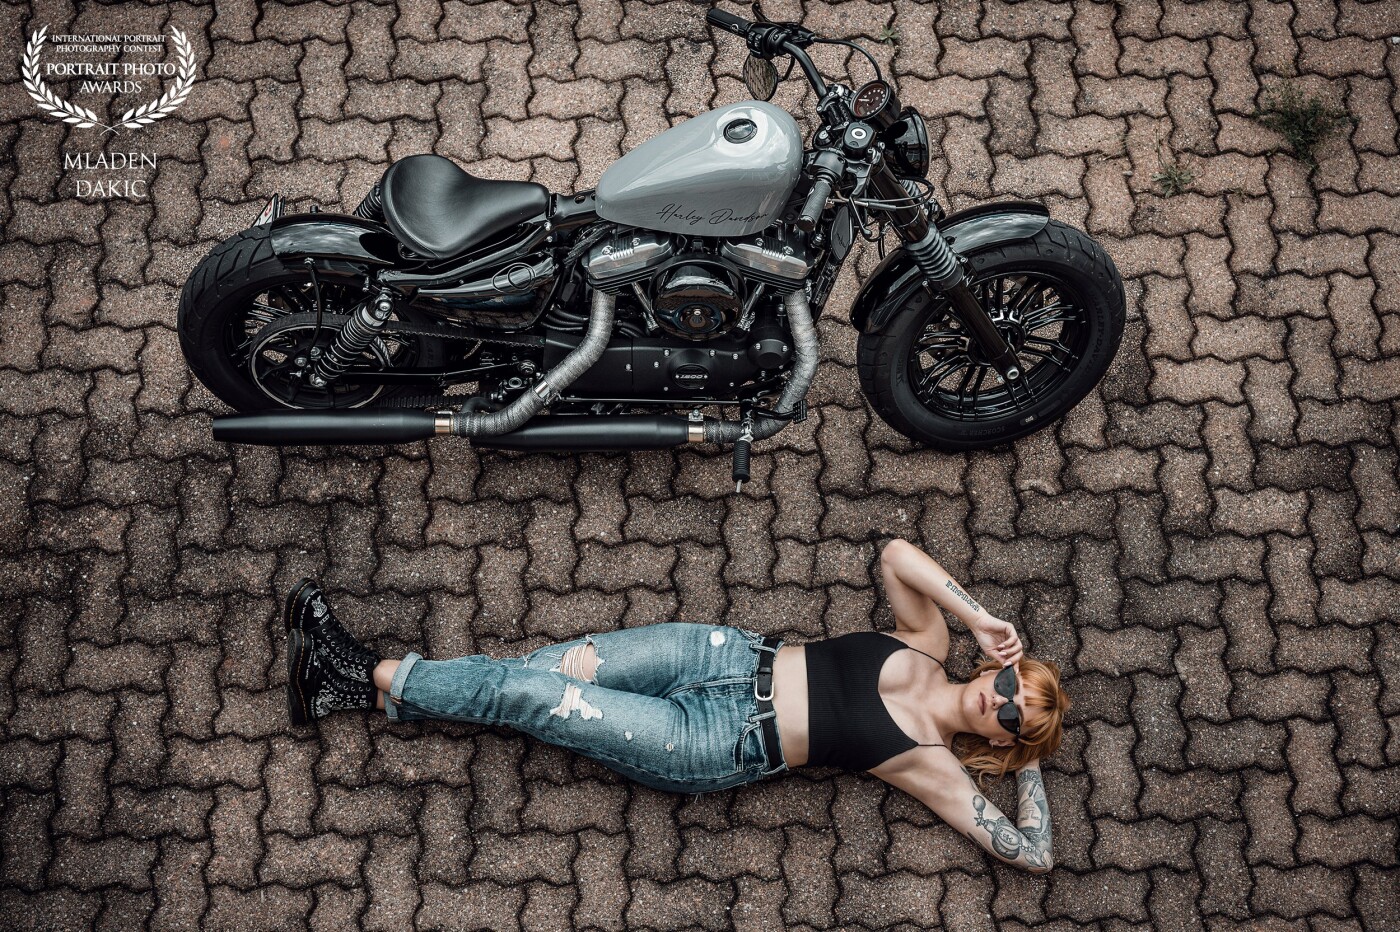 My Model Andrea owns this magnificent Bobber style Harley Davidson. The Mission was to make some cool photos of her with her Baby. One of them is this stunning picture of her laying by her Motorcyce. I love it.<br />
I used natural light only.